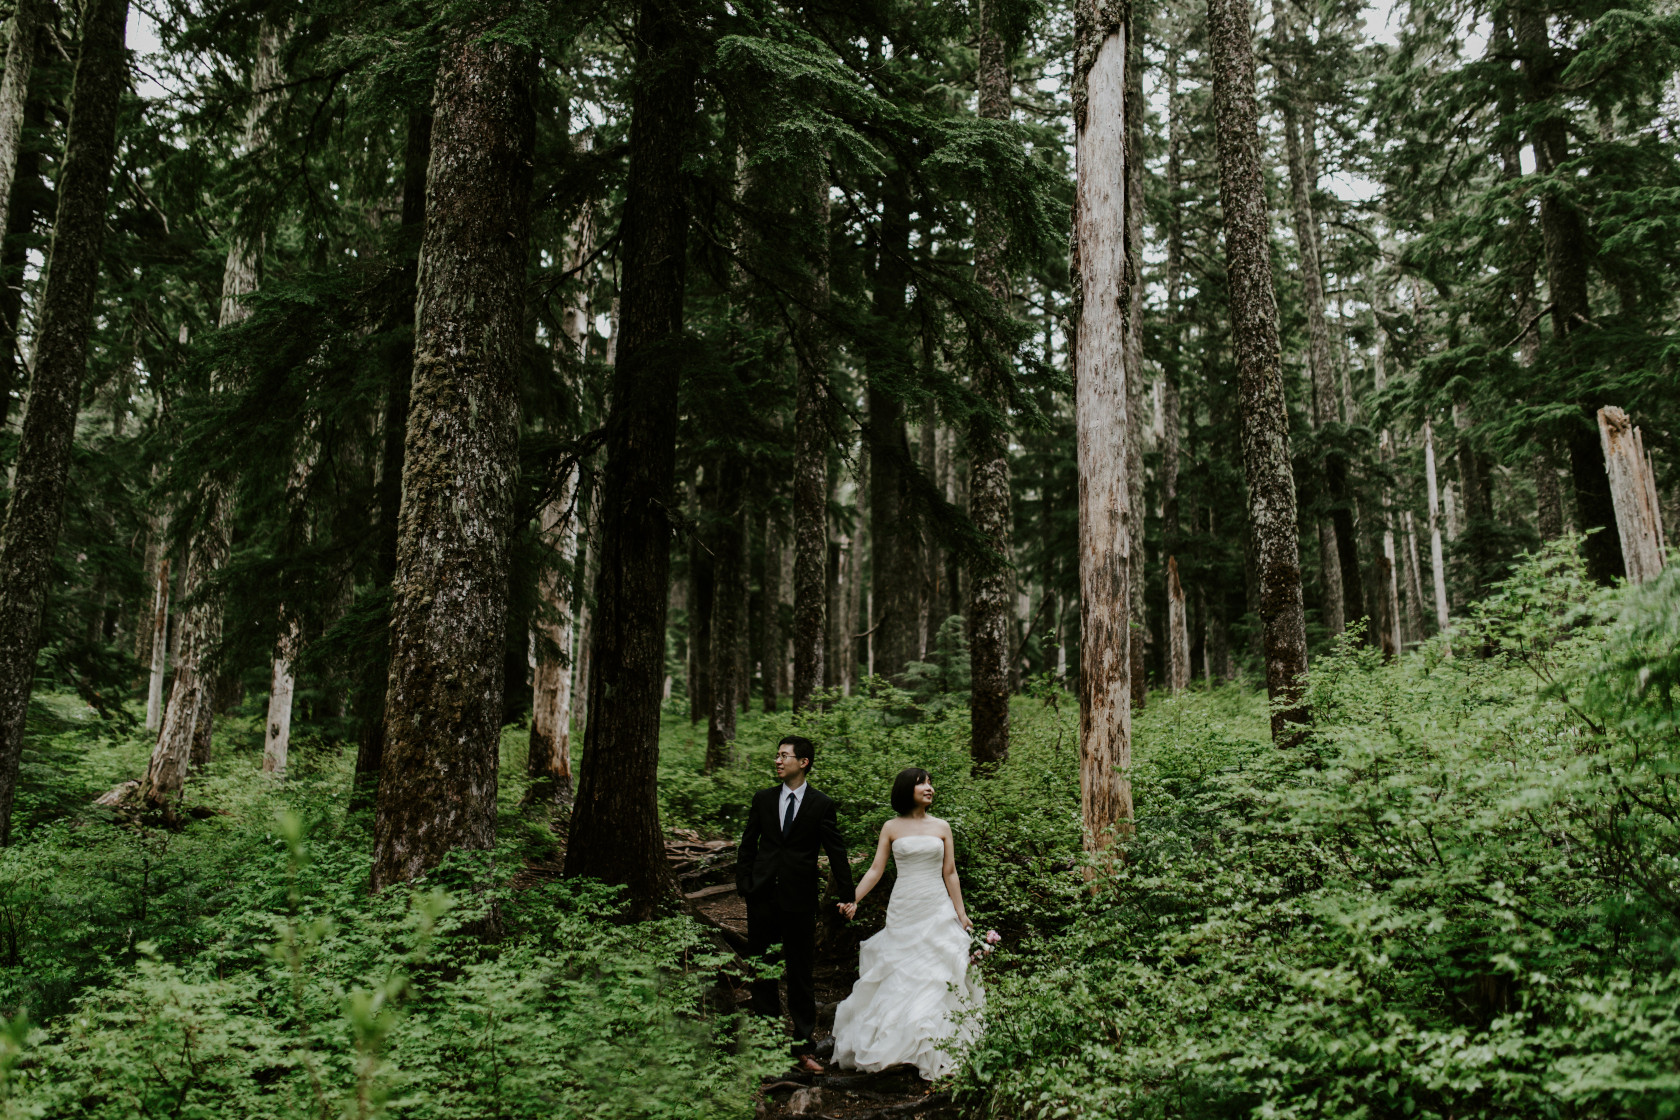 Valerie and Alex stand side by side on the trail toward Mount Hood in Oregon. Elopement wedding photography at Mount Hood by Sienna Plus Josh.